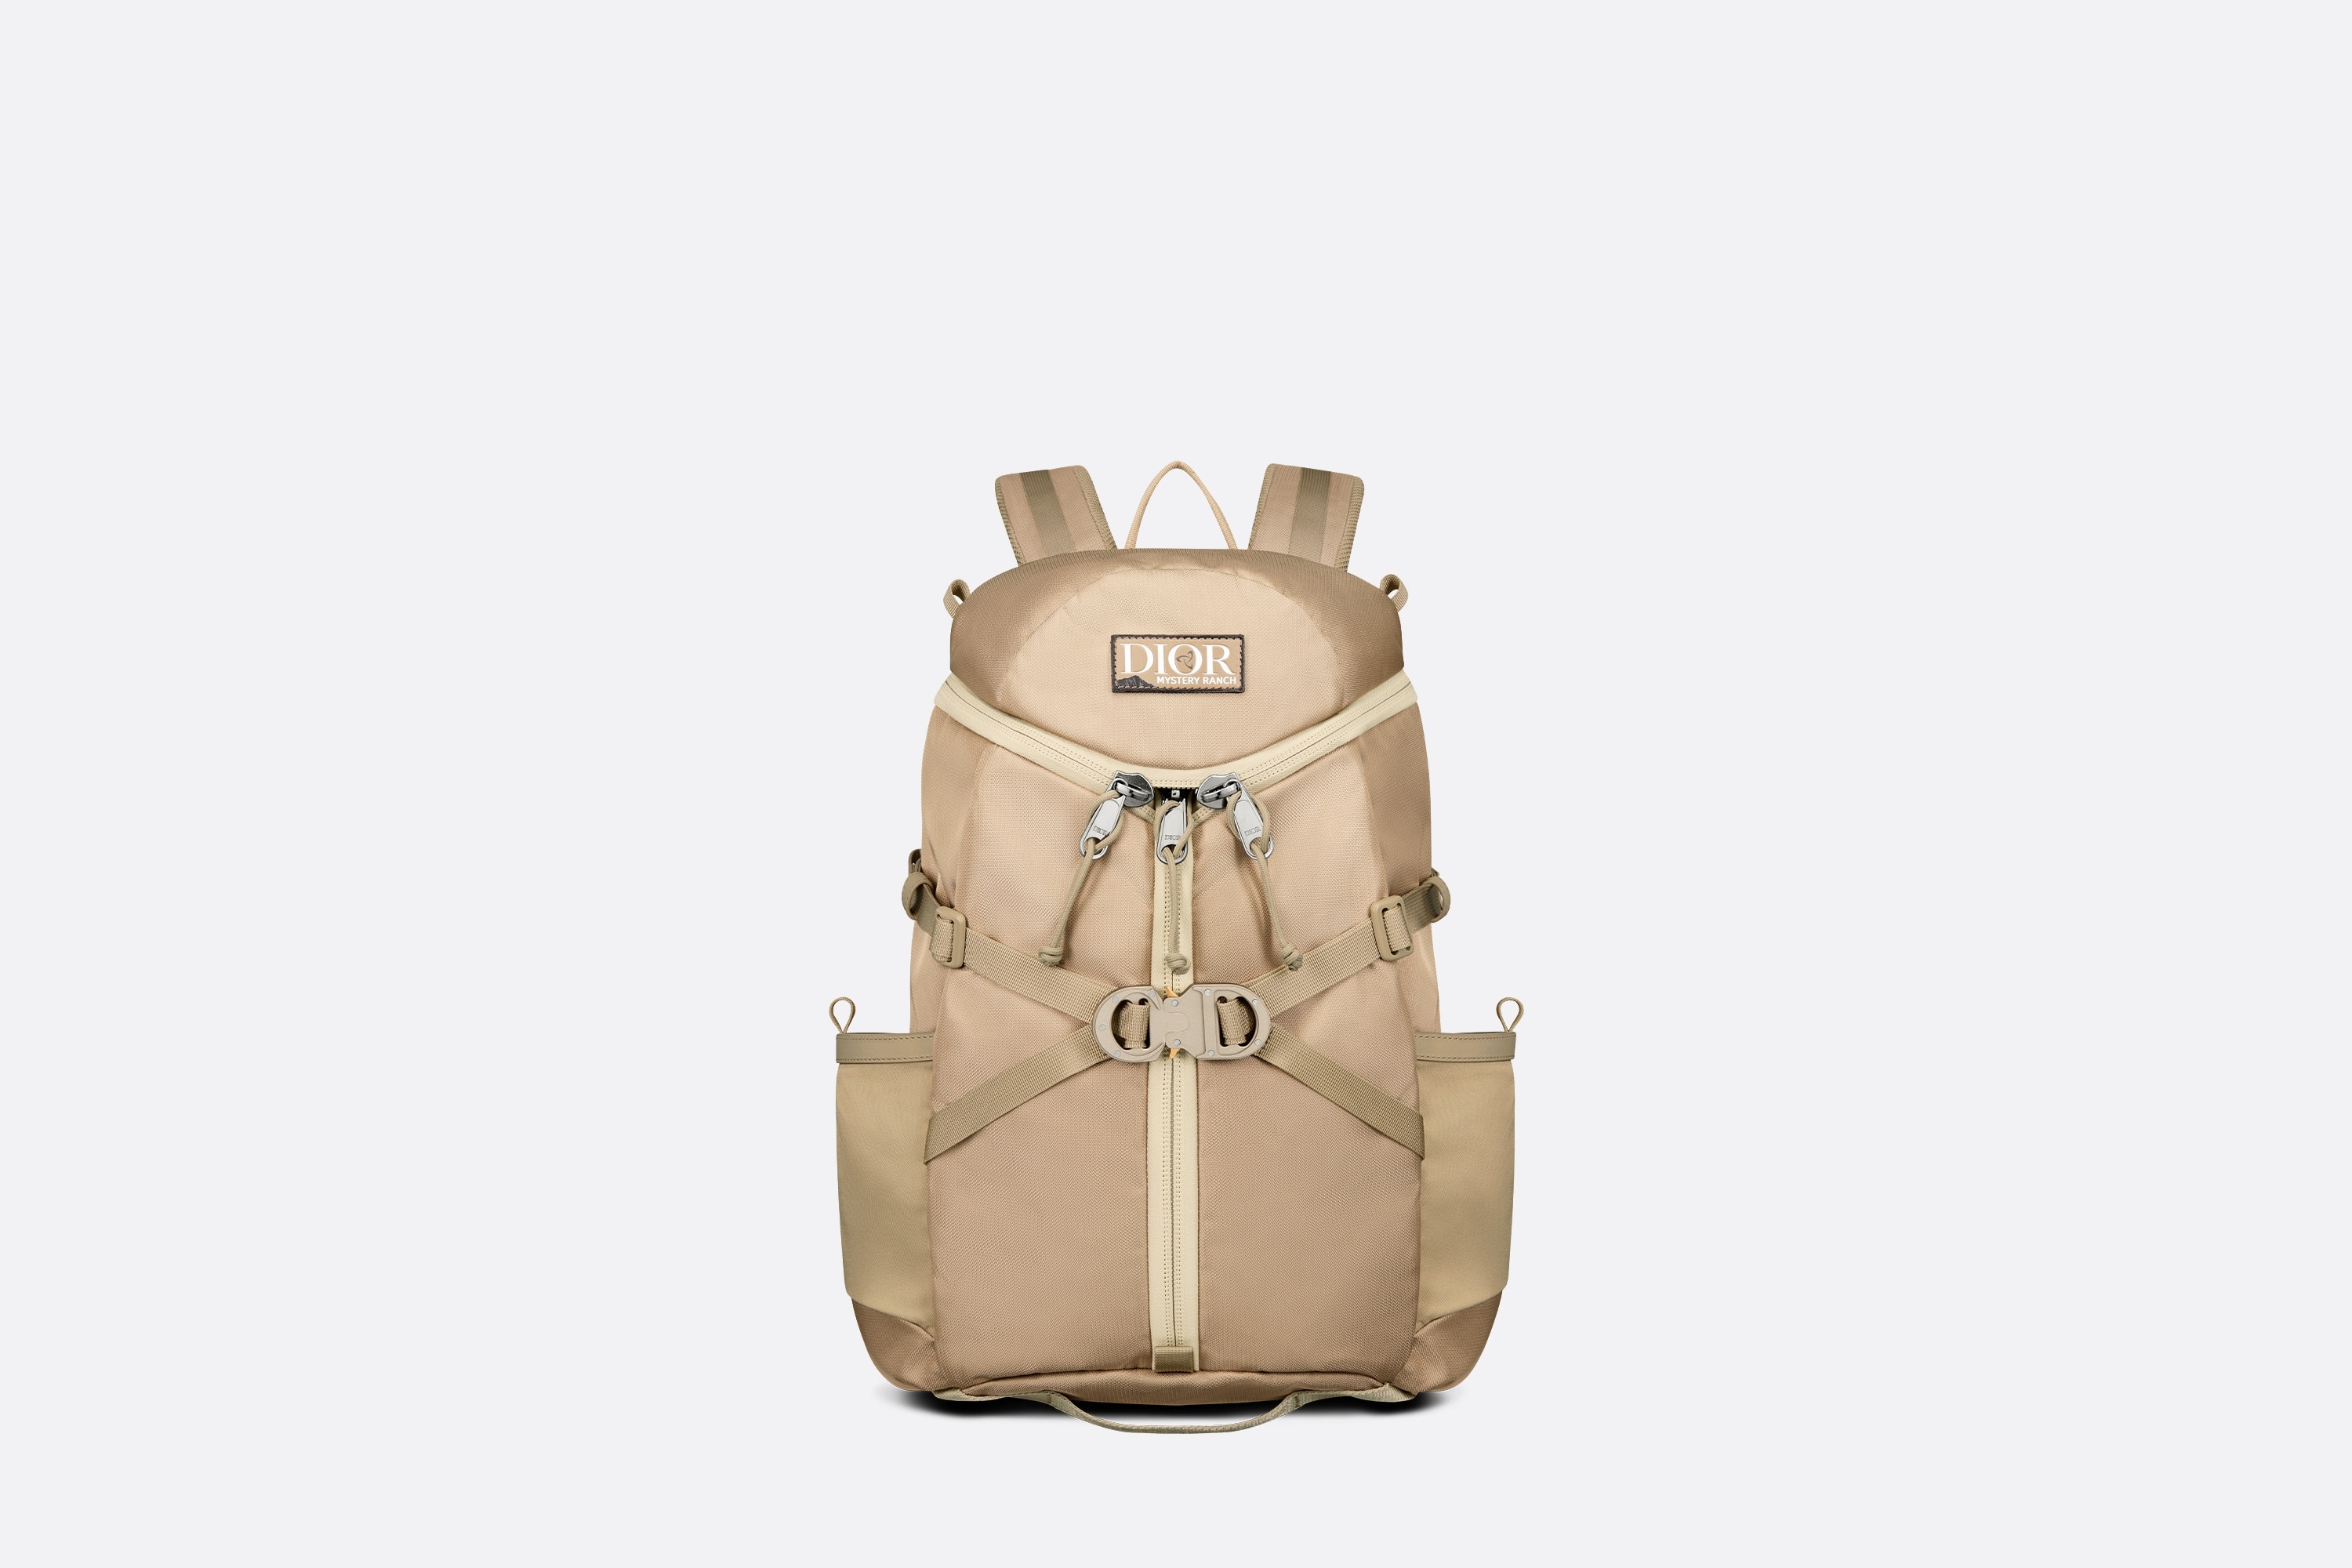 DIOR by MYSTERY RANCH Gallagator Backpack - 1